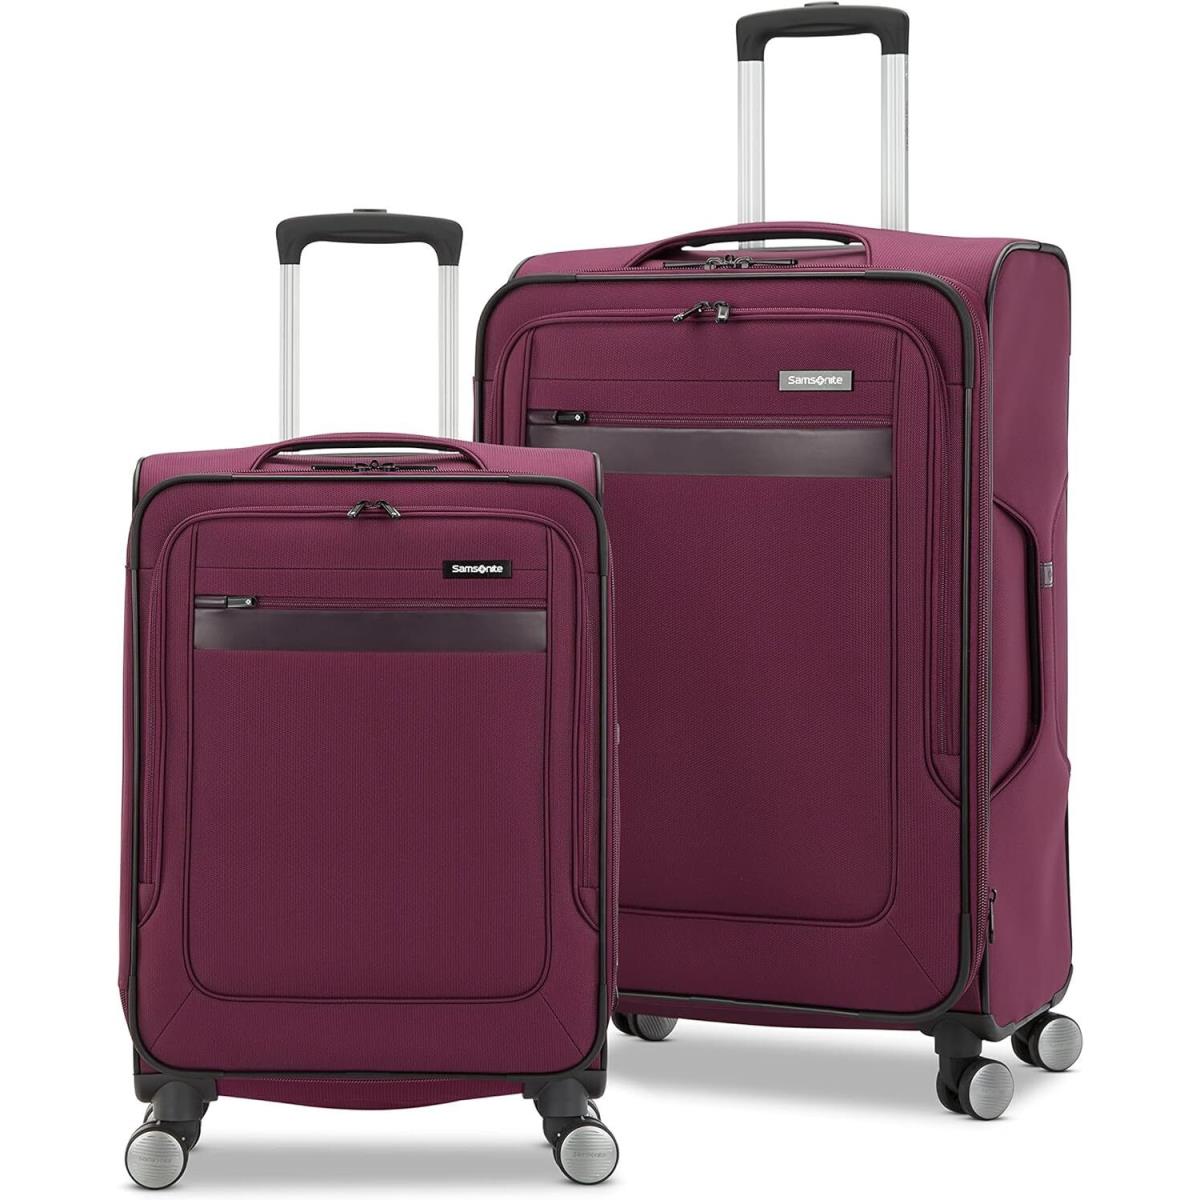 Samsonite Ascella 3.0 Softside Expandable Luggage with Spinners 2PC Set